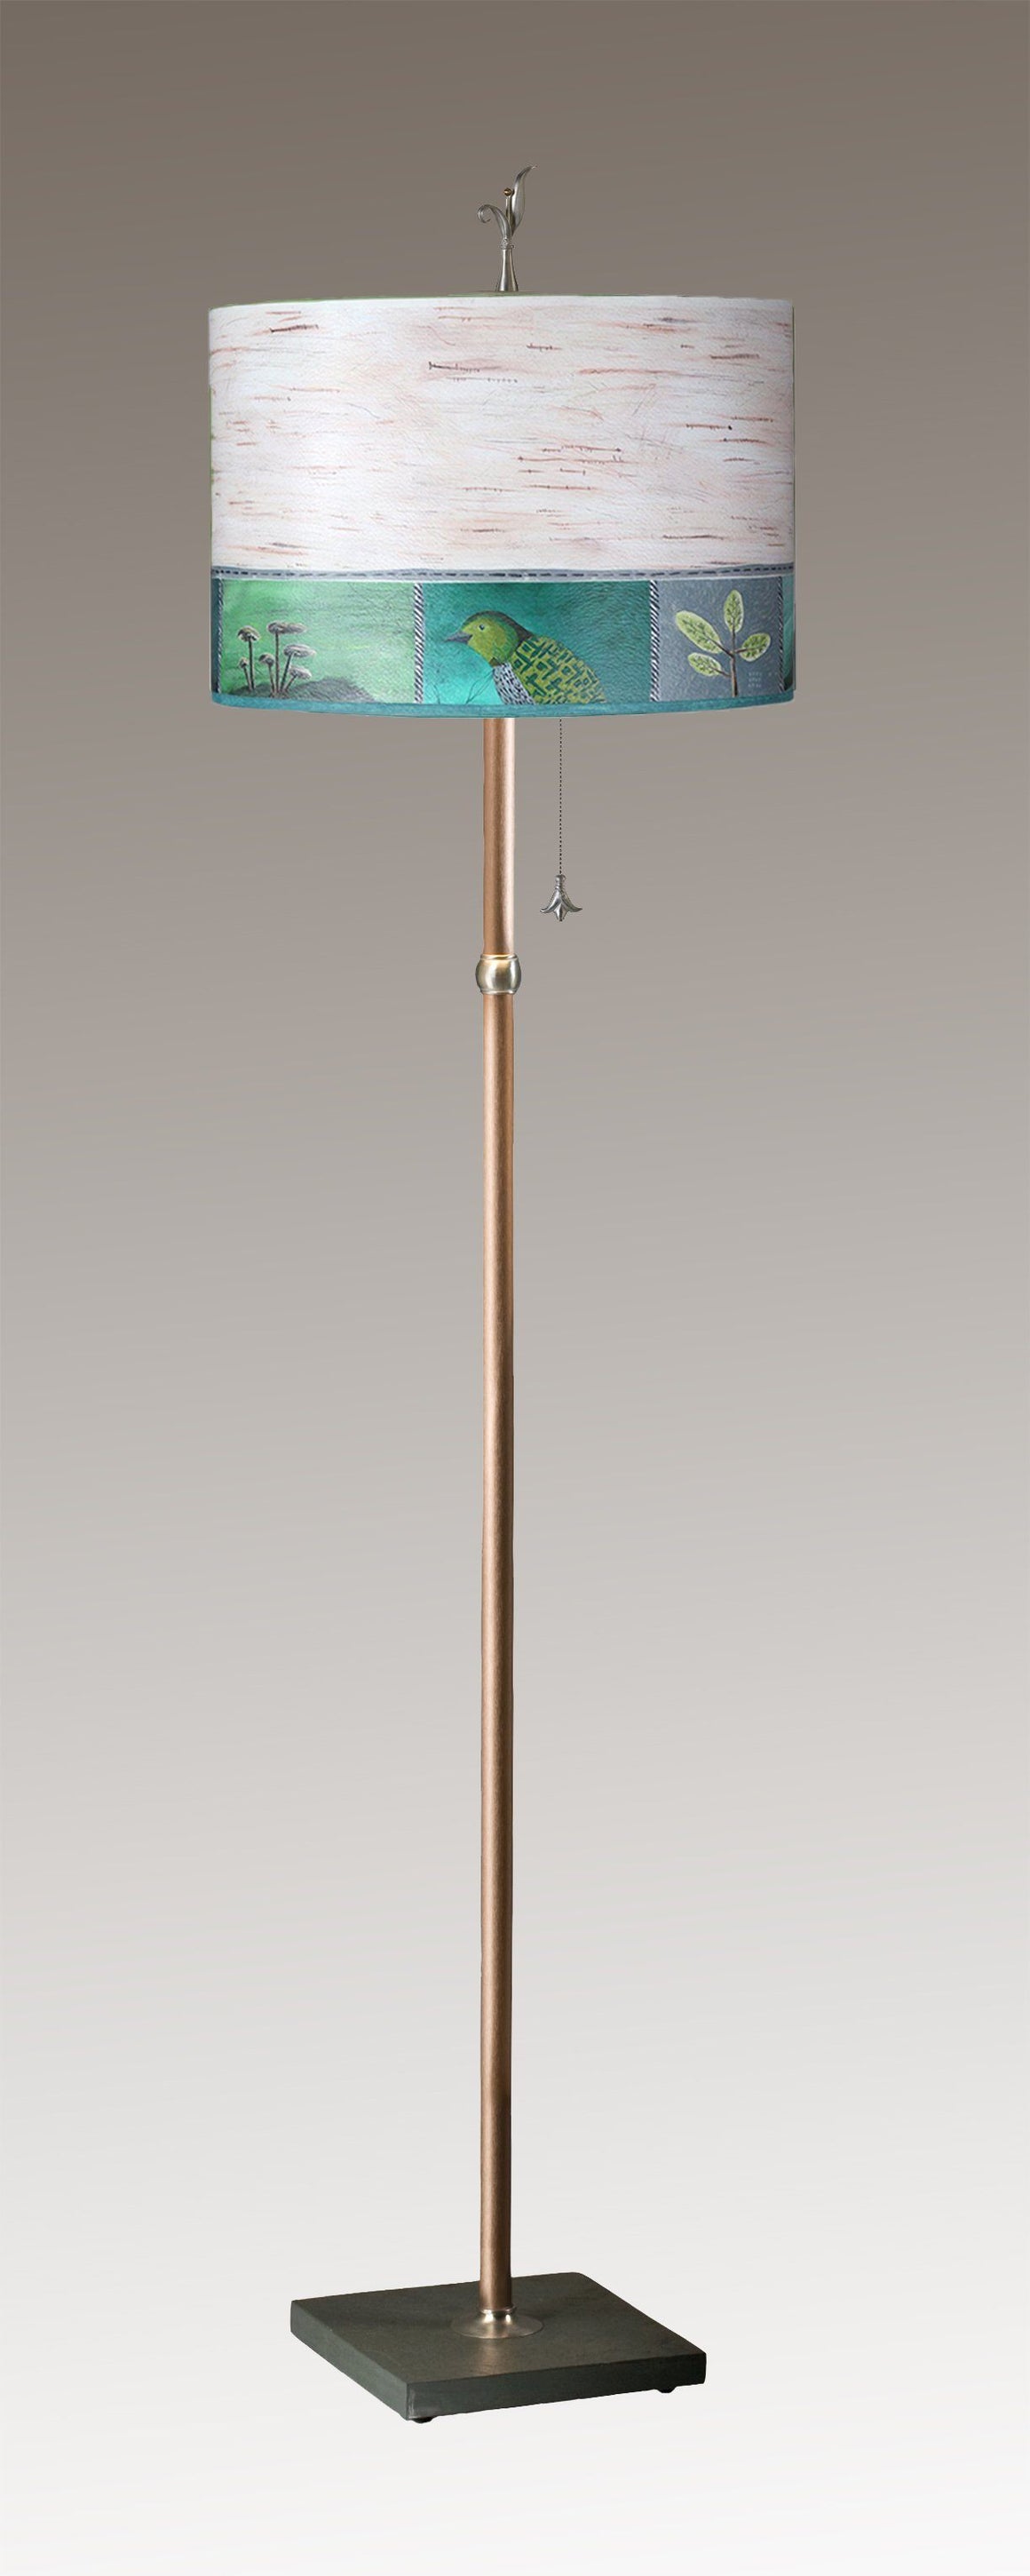 Copper Floor Lamp Large Drum Shade in Woodland Trails in Birch